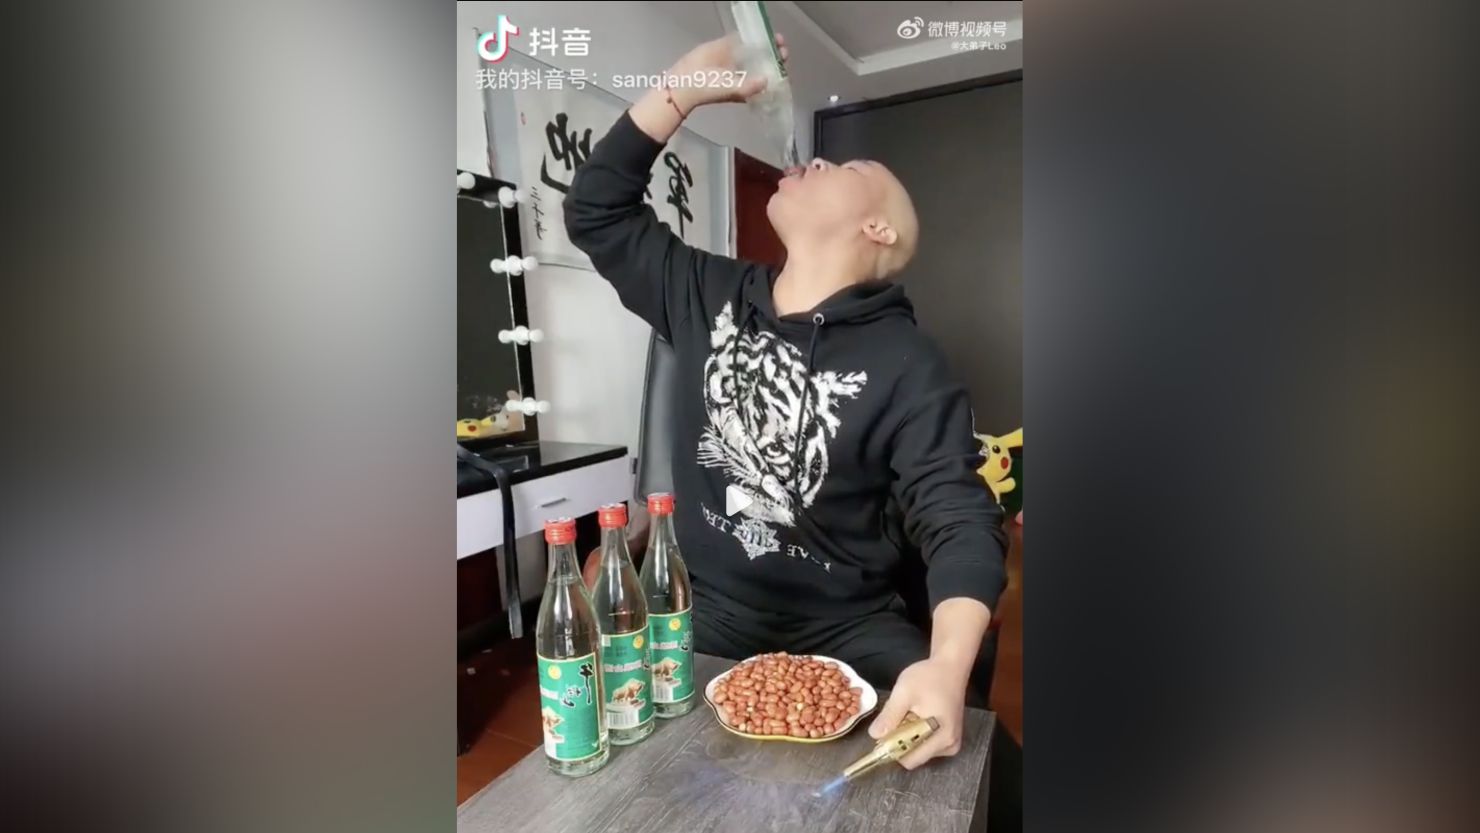 The Chinese livestreamer known as Brother Three Thousand had filmed himself taking part in  contests involving alcohol before.